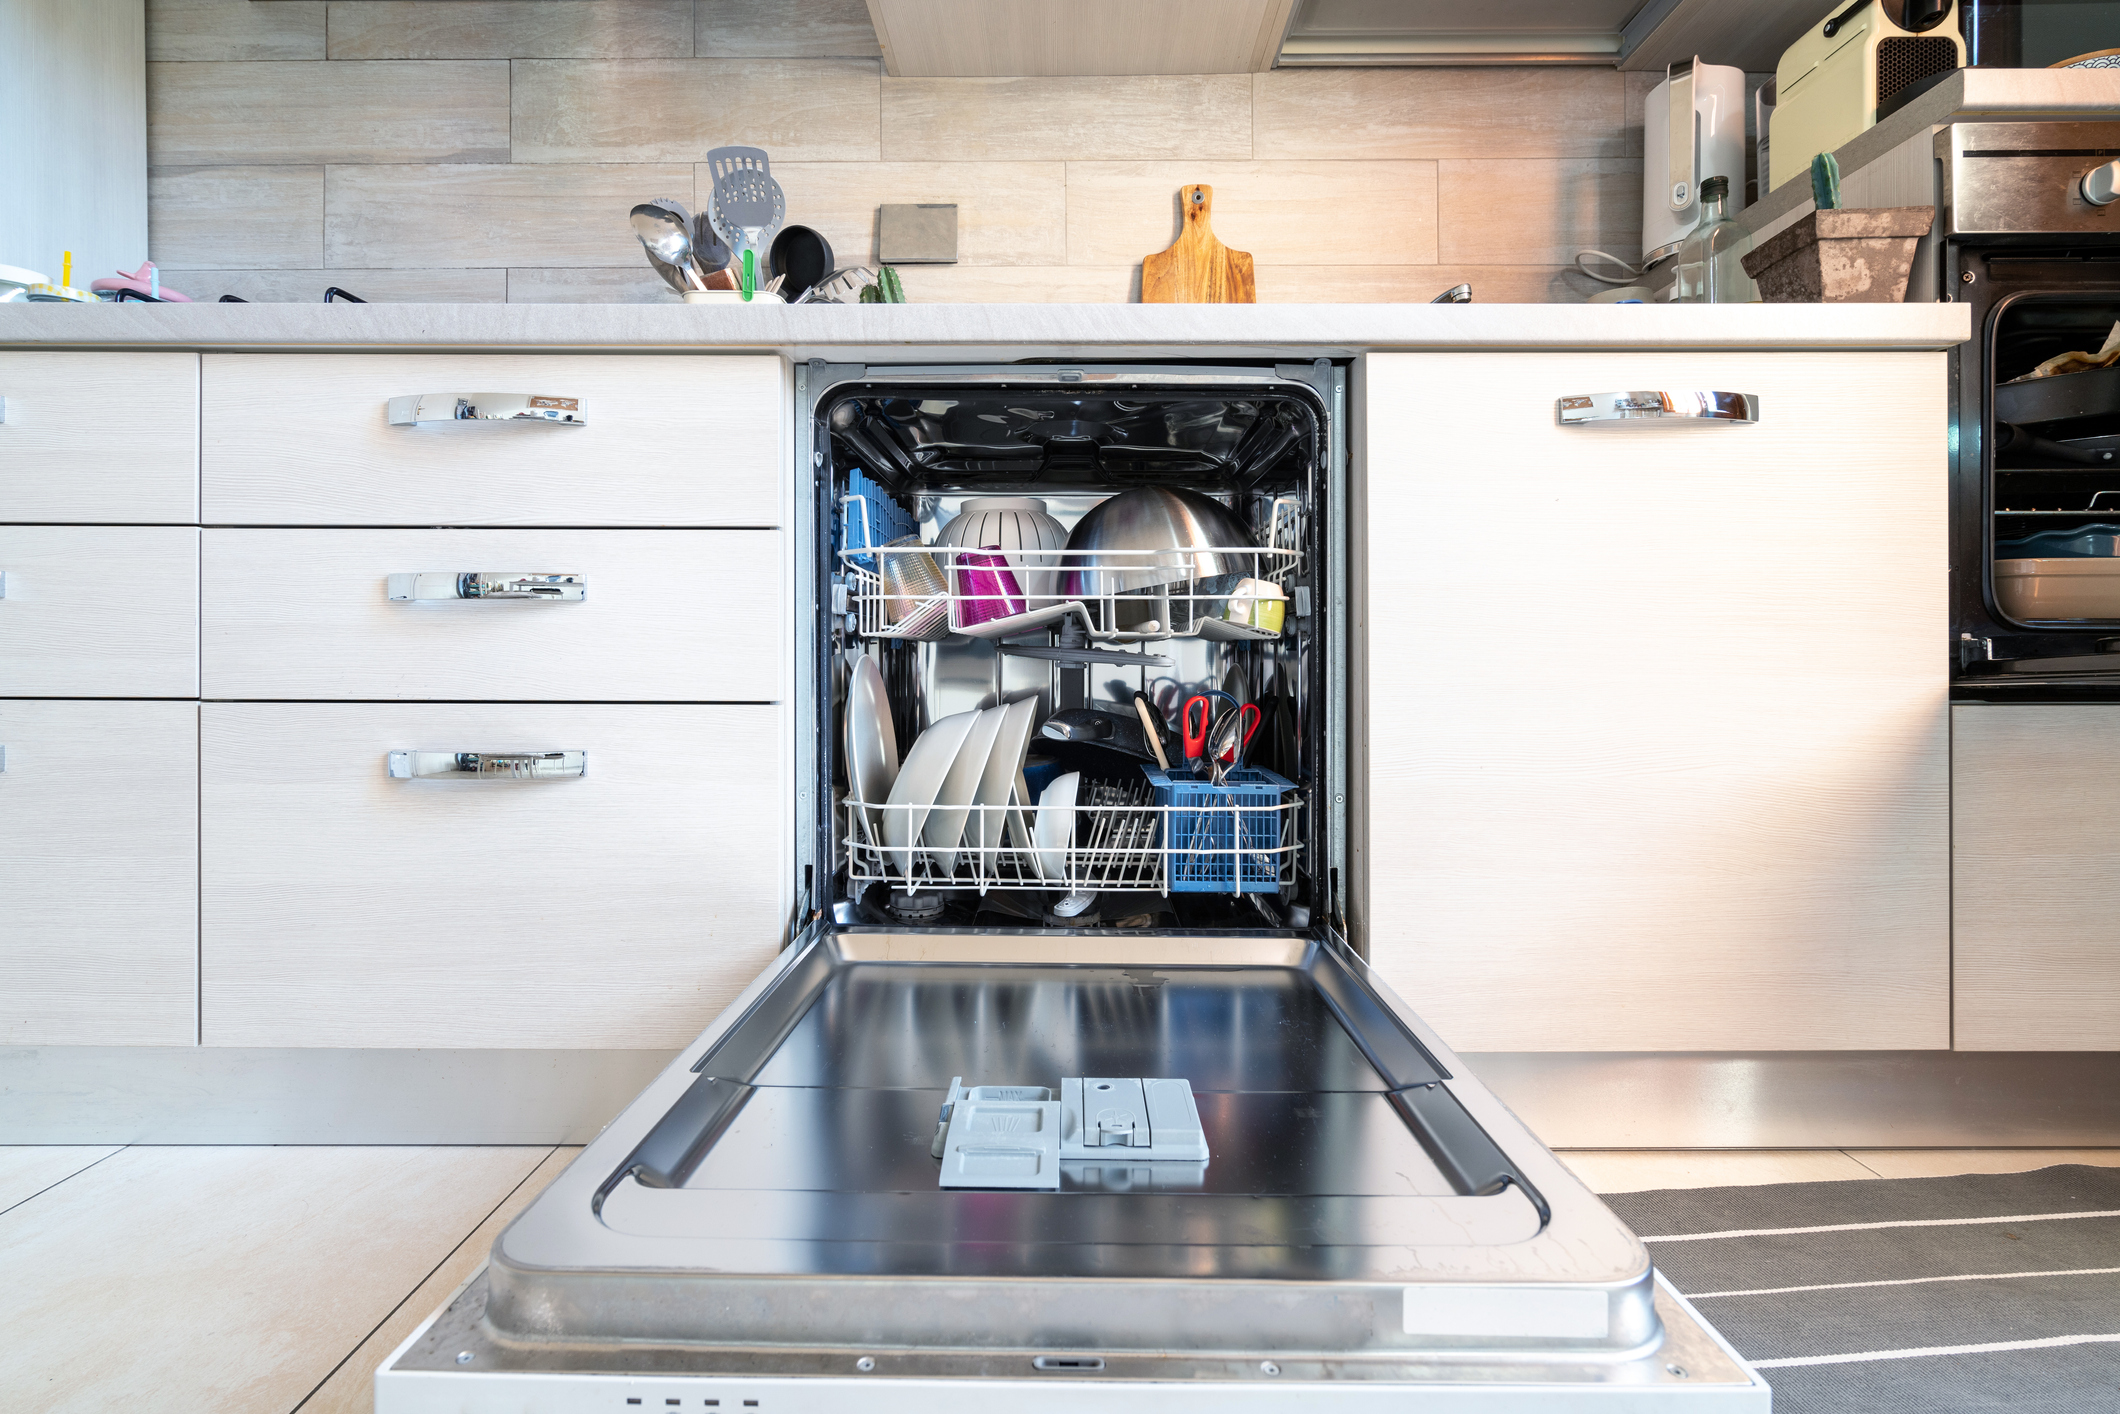 How to Clean and Disinfect a Kitchen